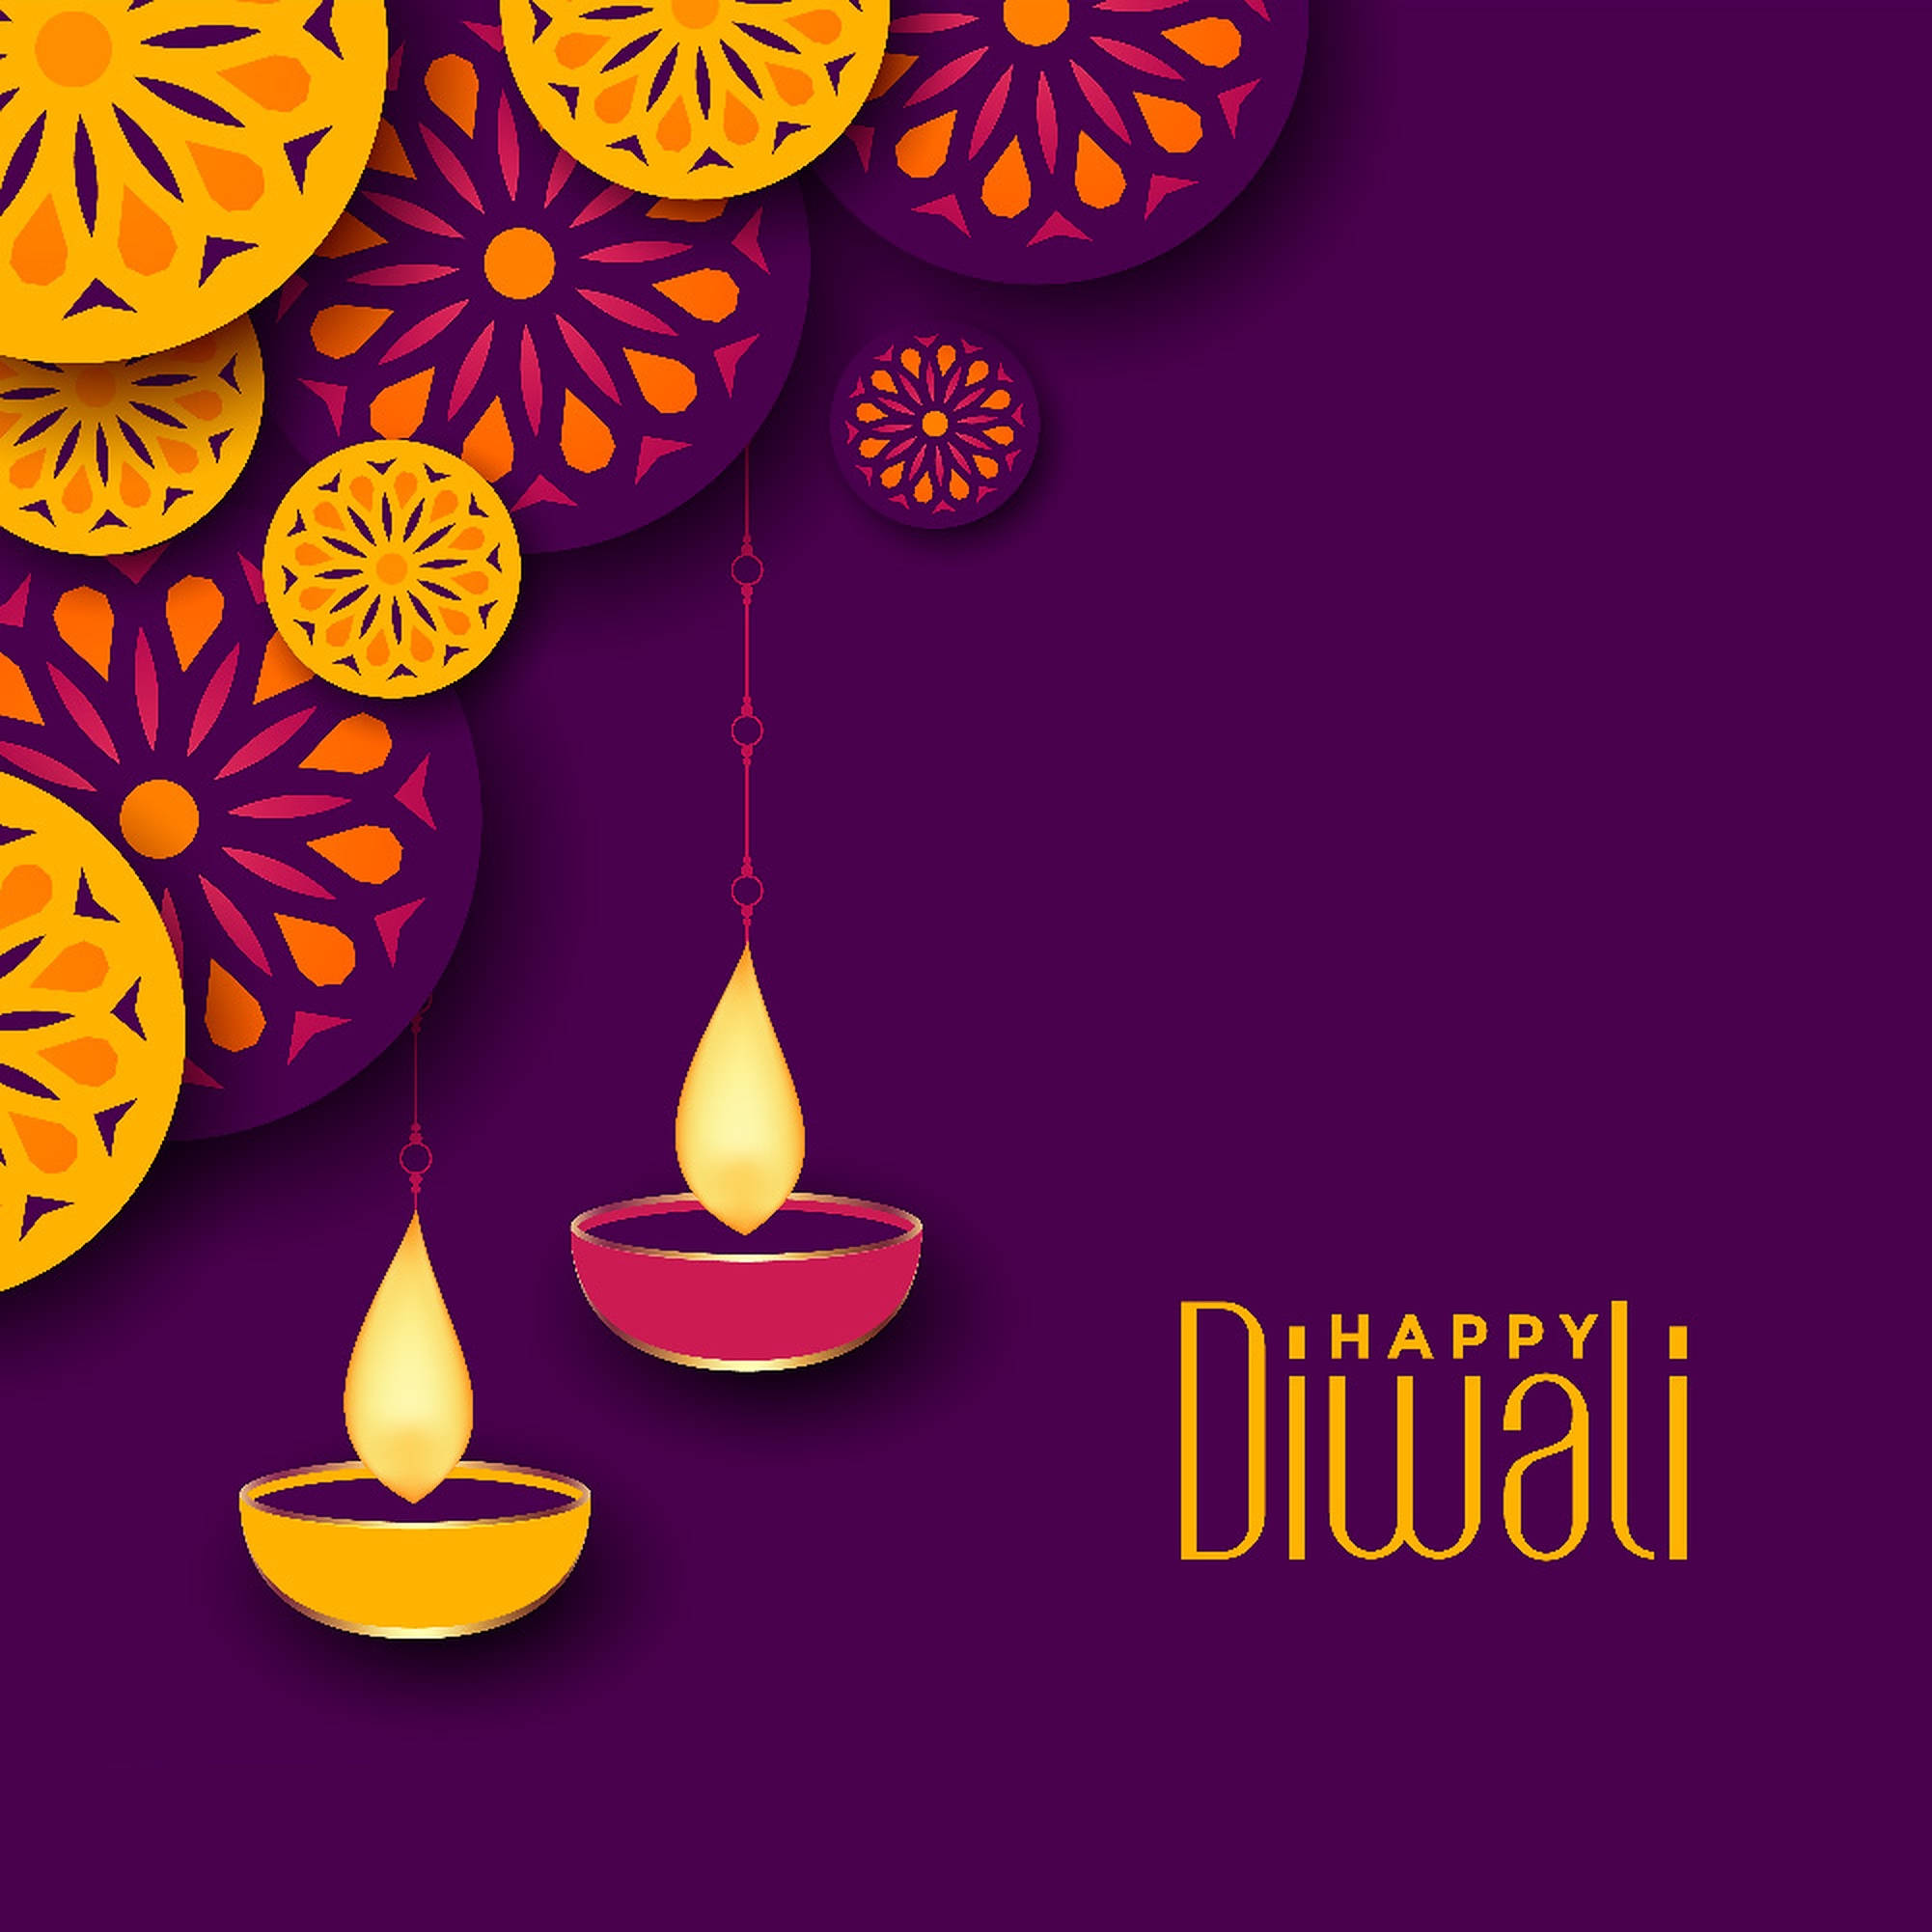 A Great Piece Of Vector Art Featuring Two Diyas And The Words 